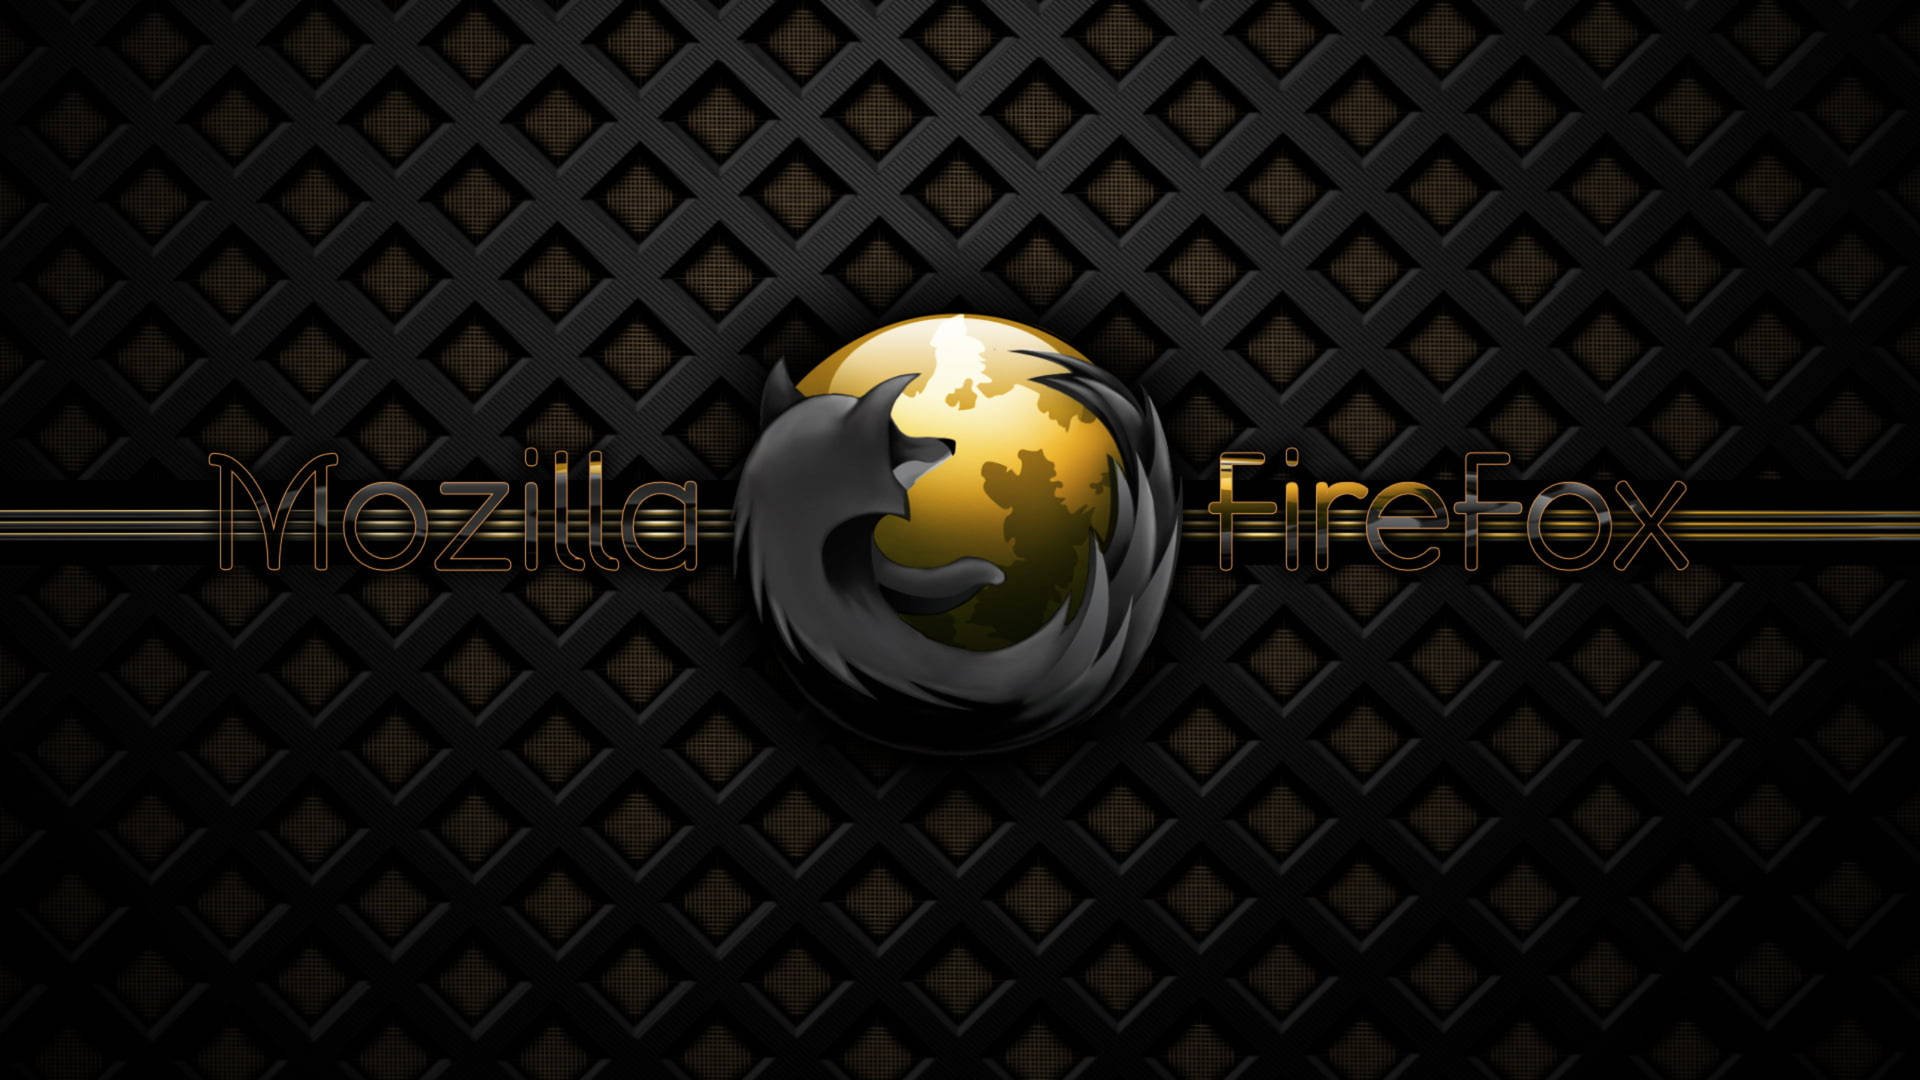 Mozilla Firefox In Black And Gold Background